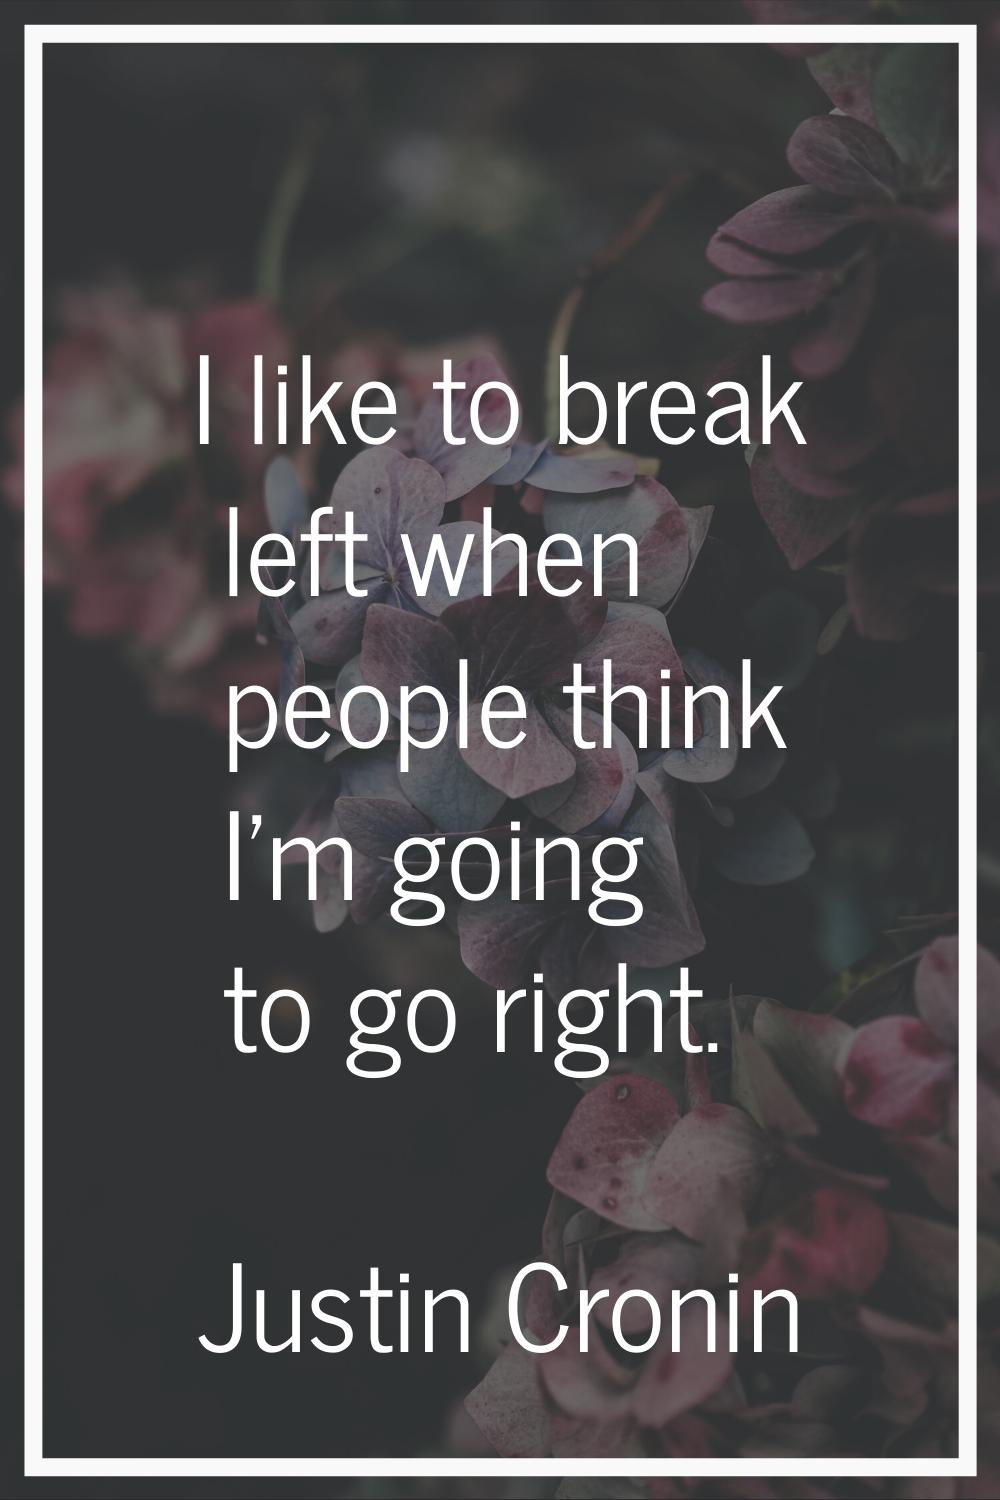 I like to break left when people think I'm going to go right.